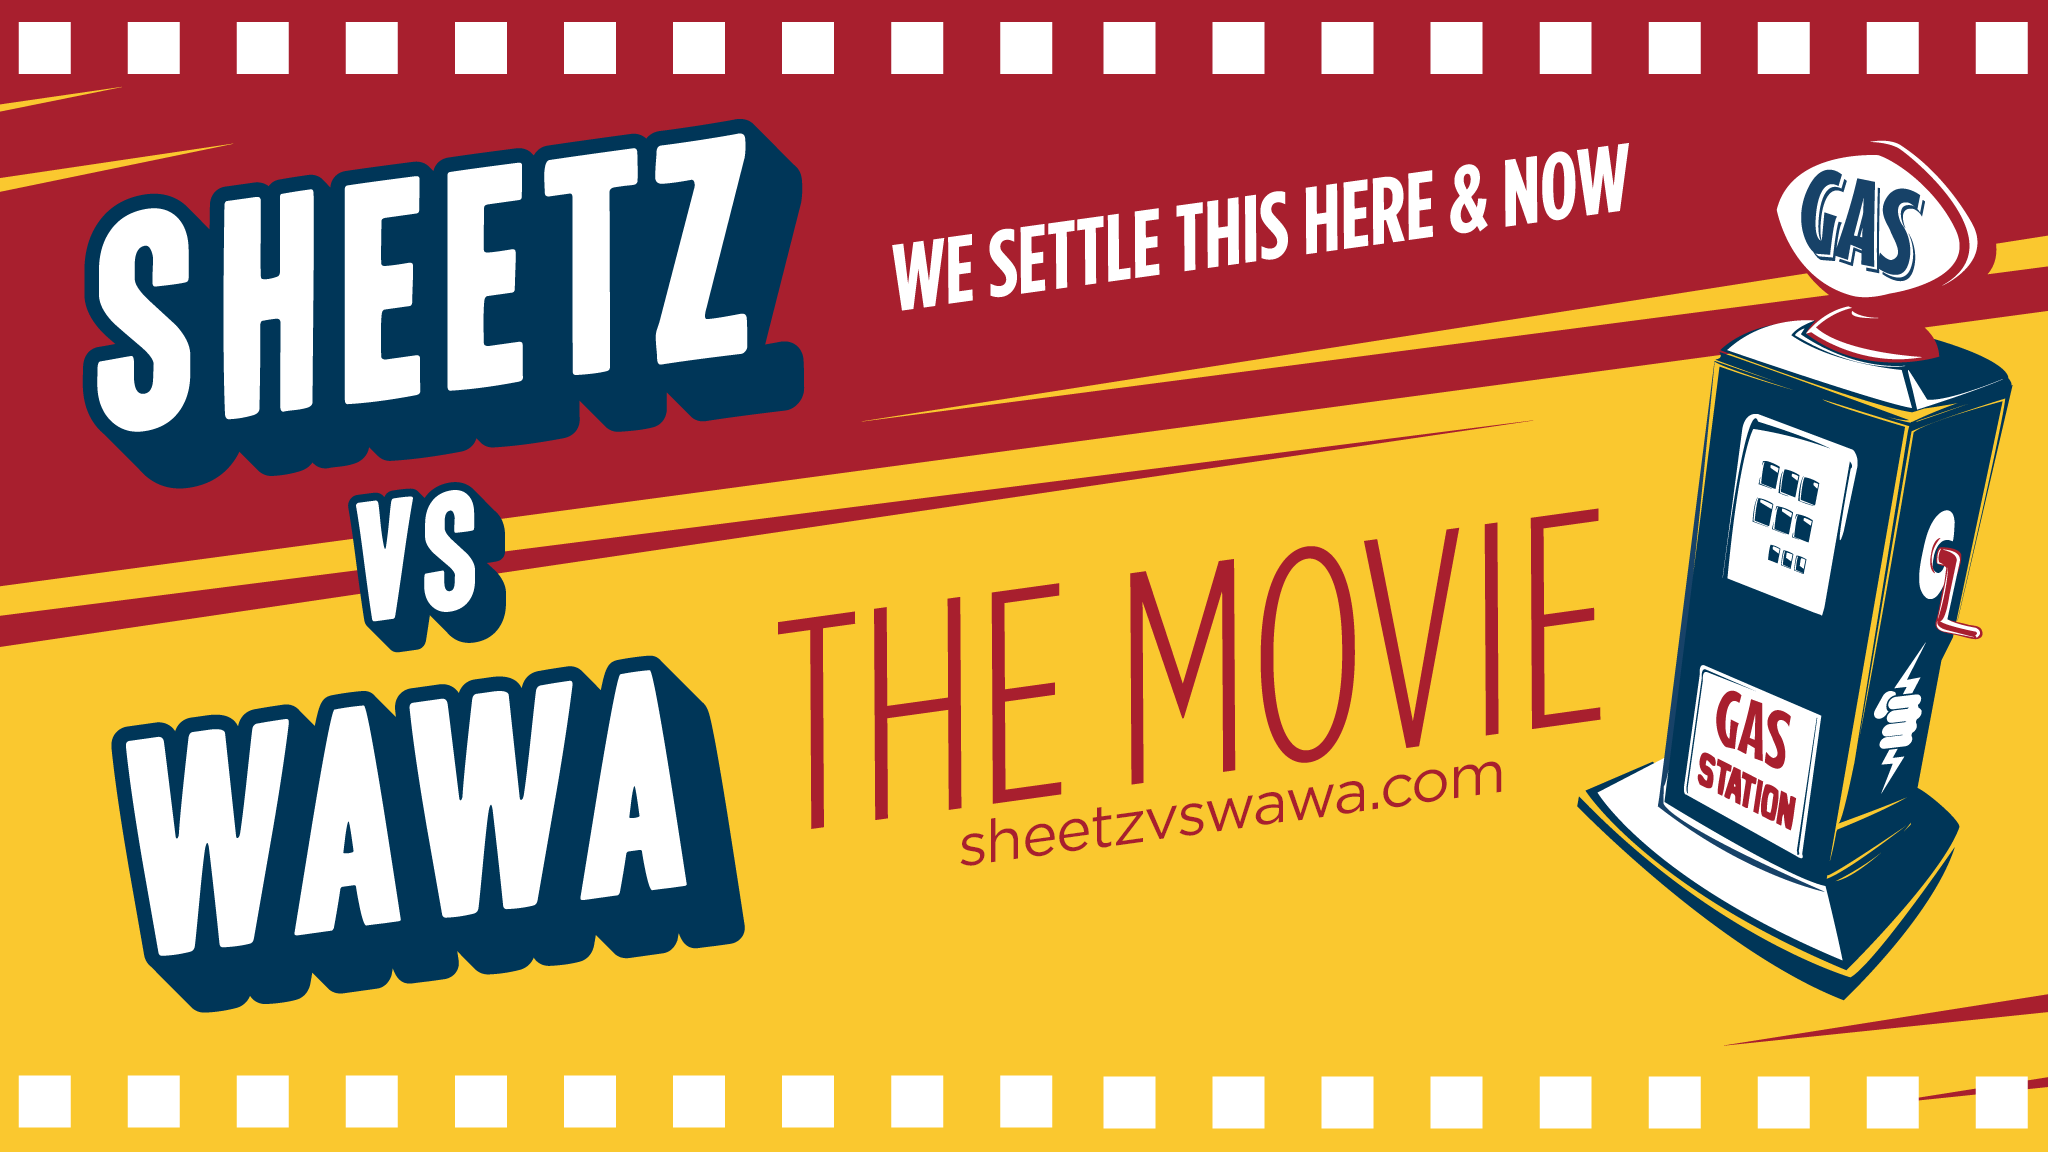 Sheetz Logo - There's a documentary in the works about the Sheetz vs. Wawa rivalry